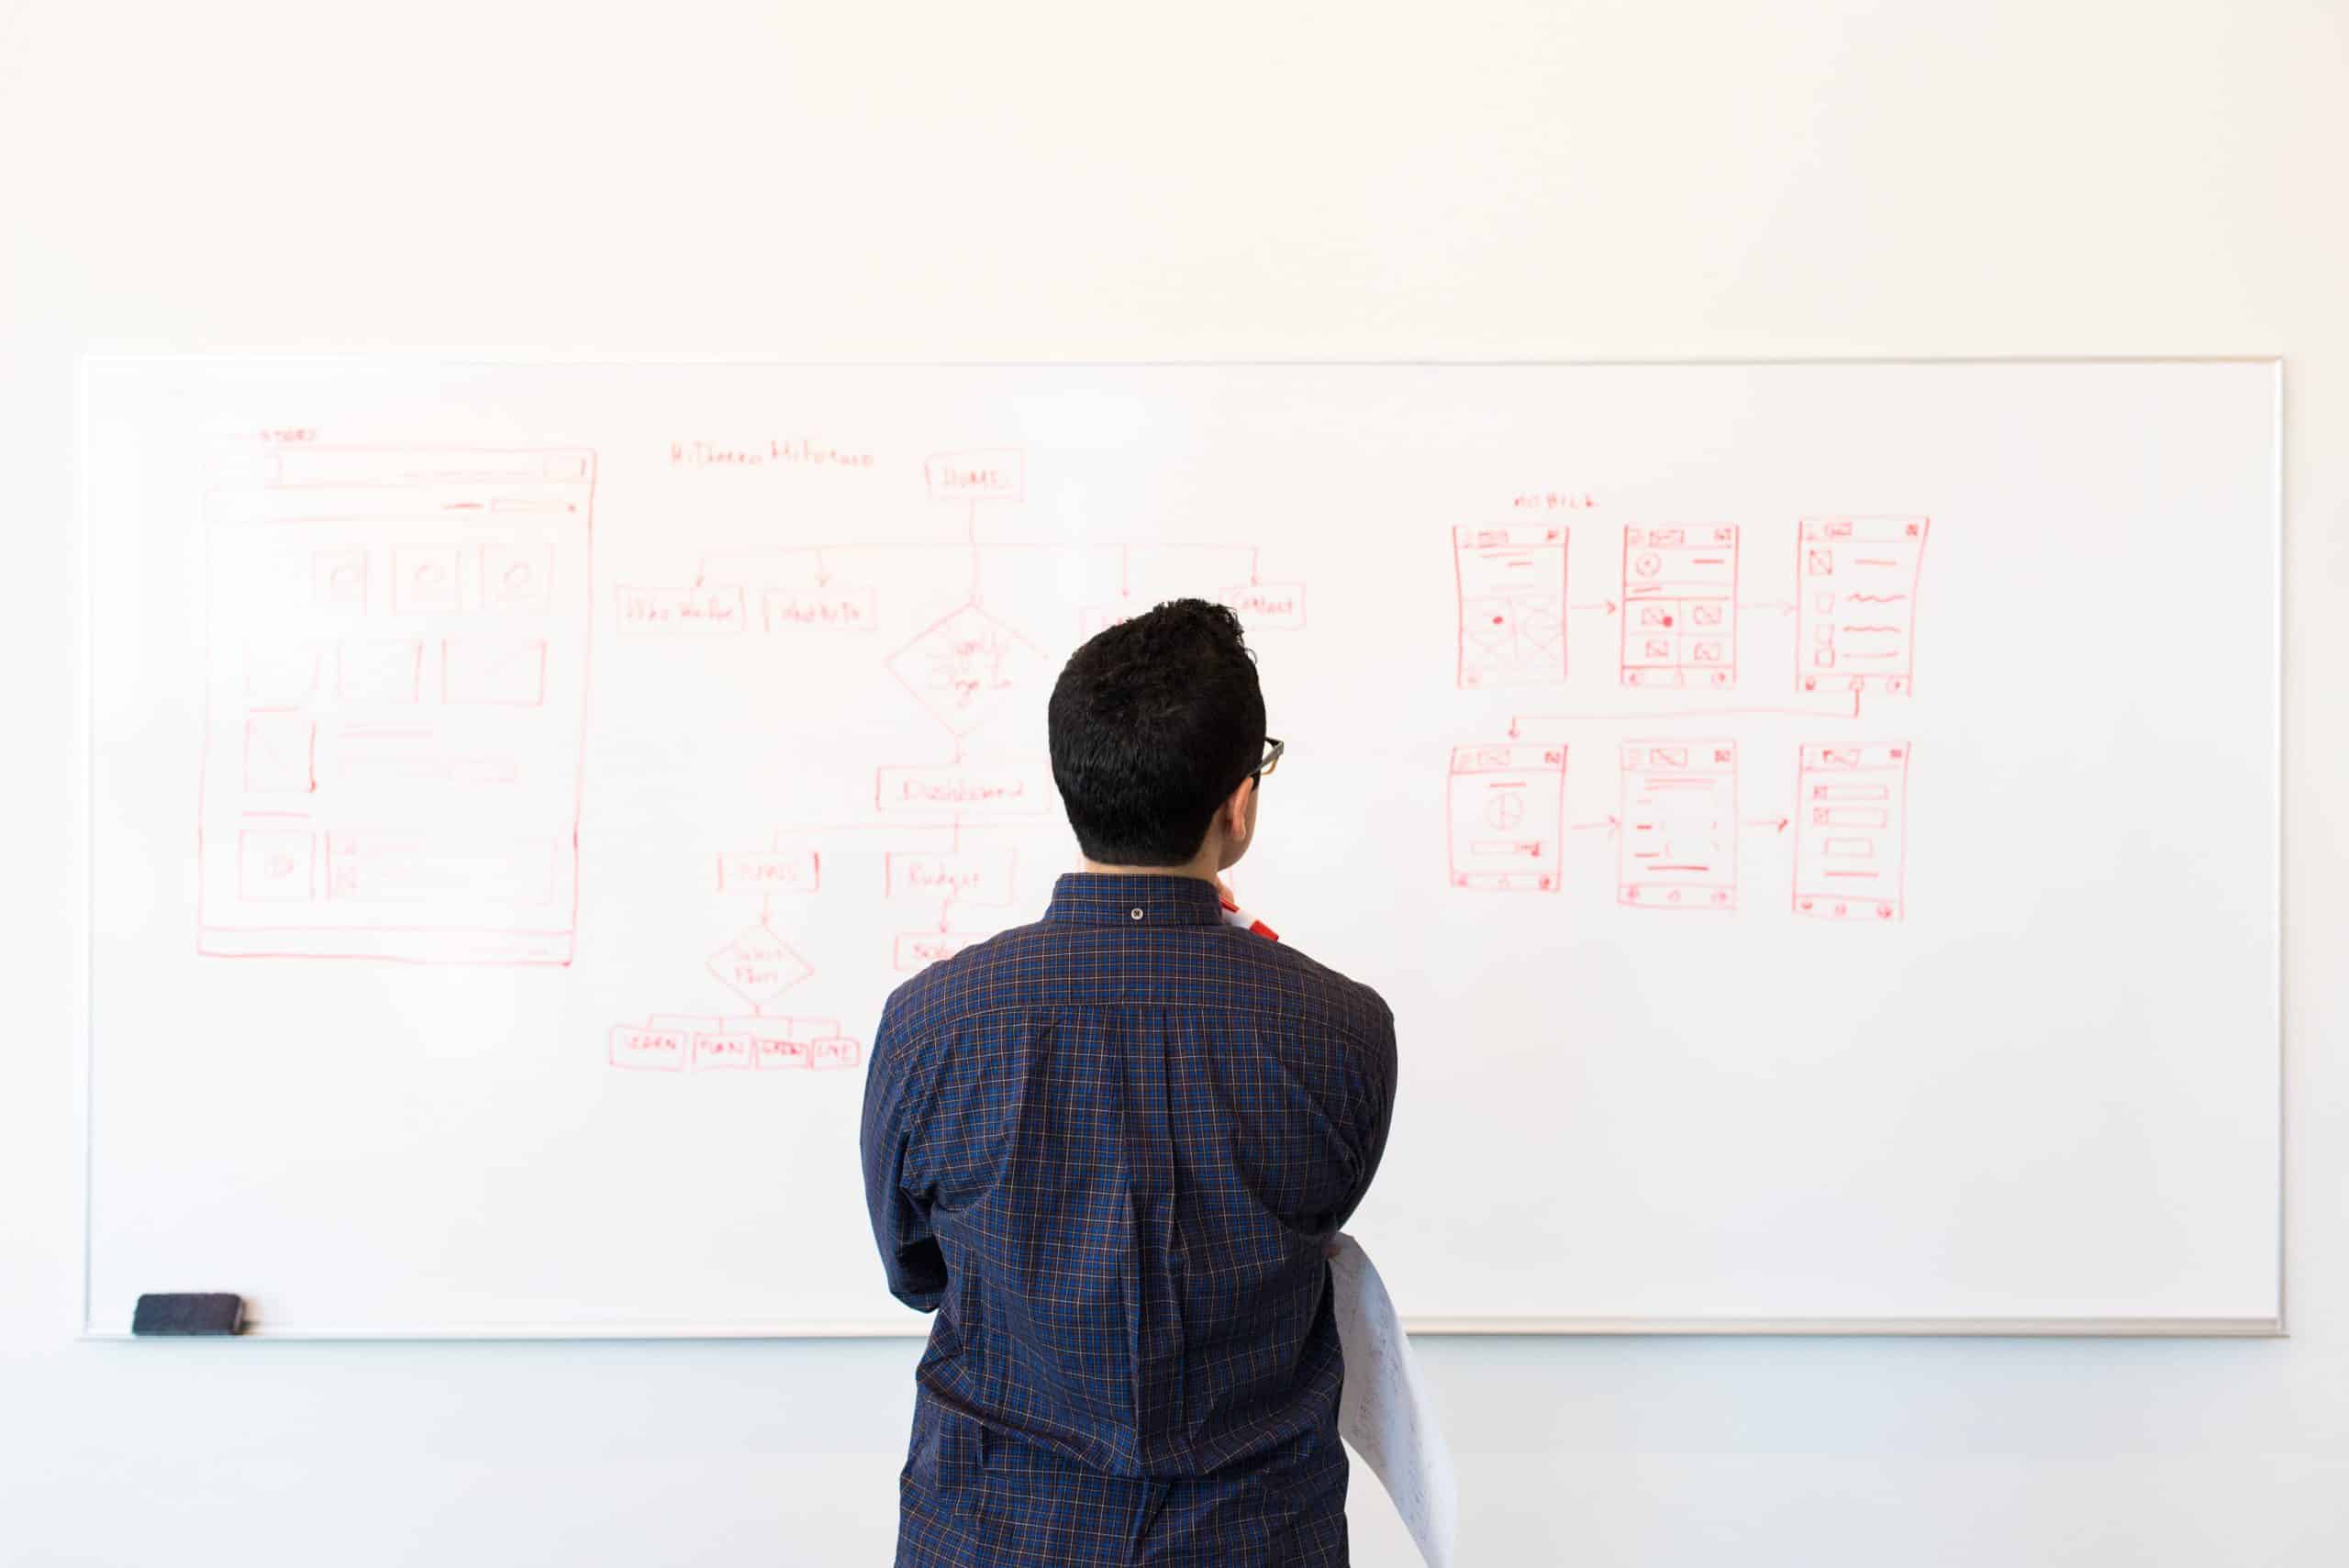 Man brainstorming taking visual testing to the next level on white board